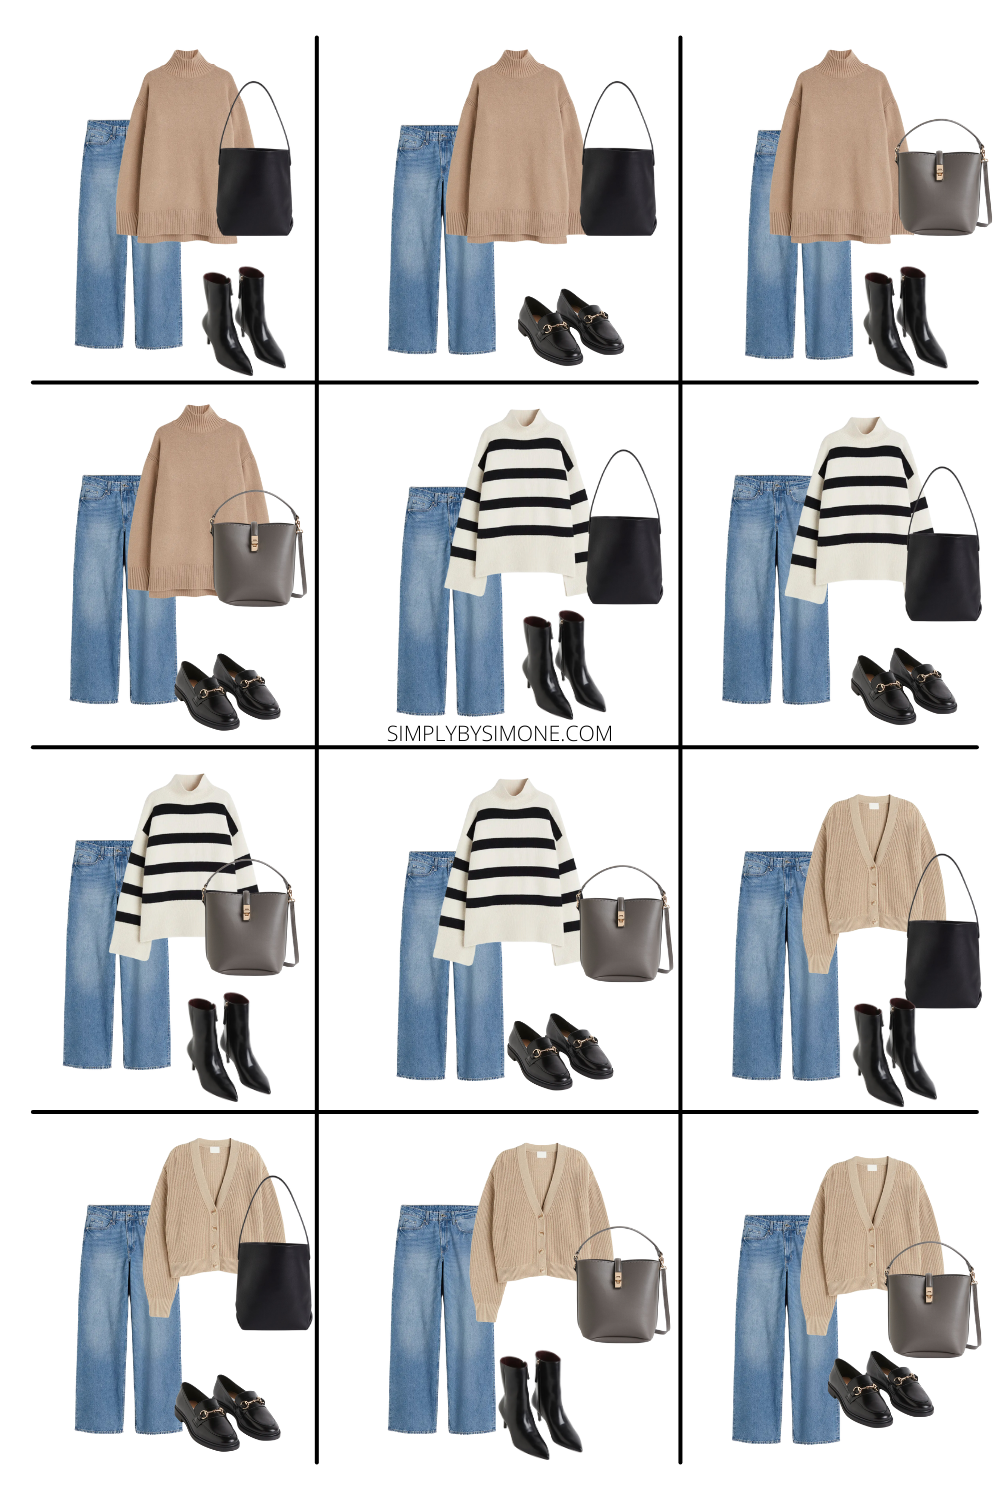 Affordable H&M Fall Capsule Wardrobe | 15 Pieces, 48 Outfits | How to Build a Capsule Wardrobe | H&M Fall Clothes | Outfit Inspiration | 48 Fall Weather Outfit Ideas | Fall Vacation Packing Guide | H&M Fall Capsule Wardrobe - What To Wear This Fall 2023, Parisian Outfit Ideas | Looks 13-24 | Simply by Simone